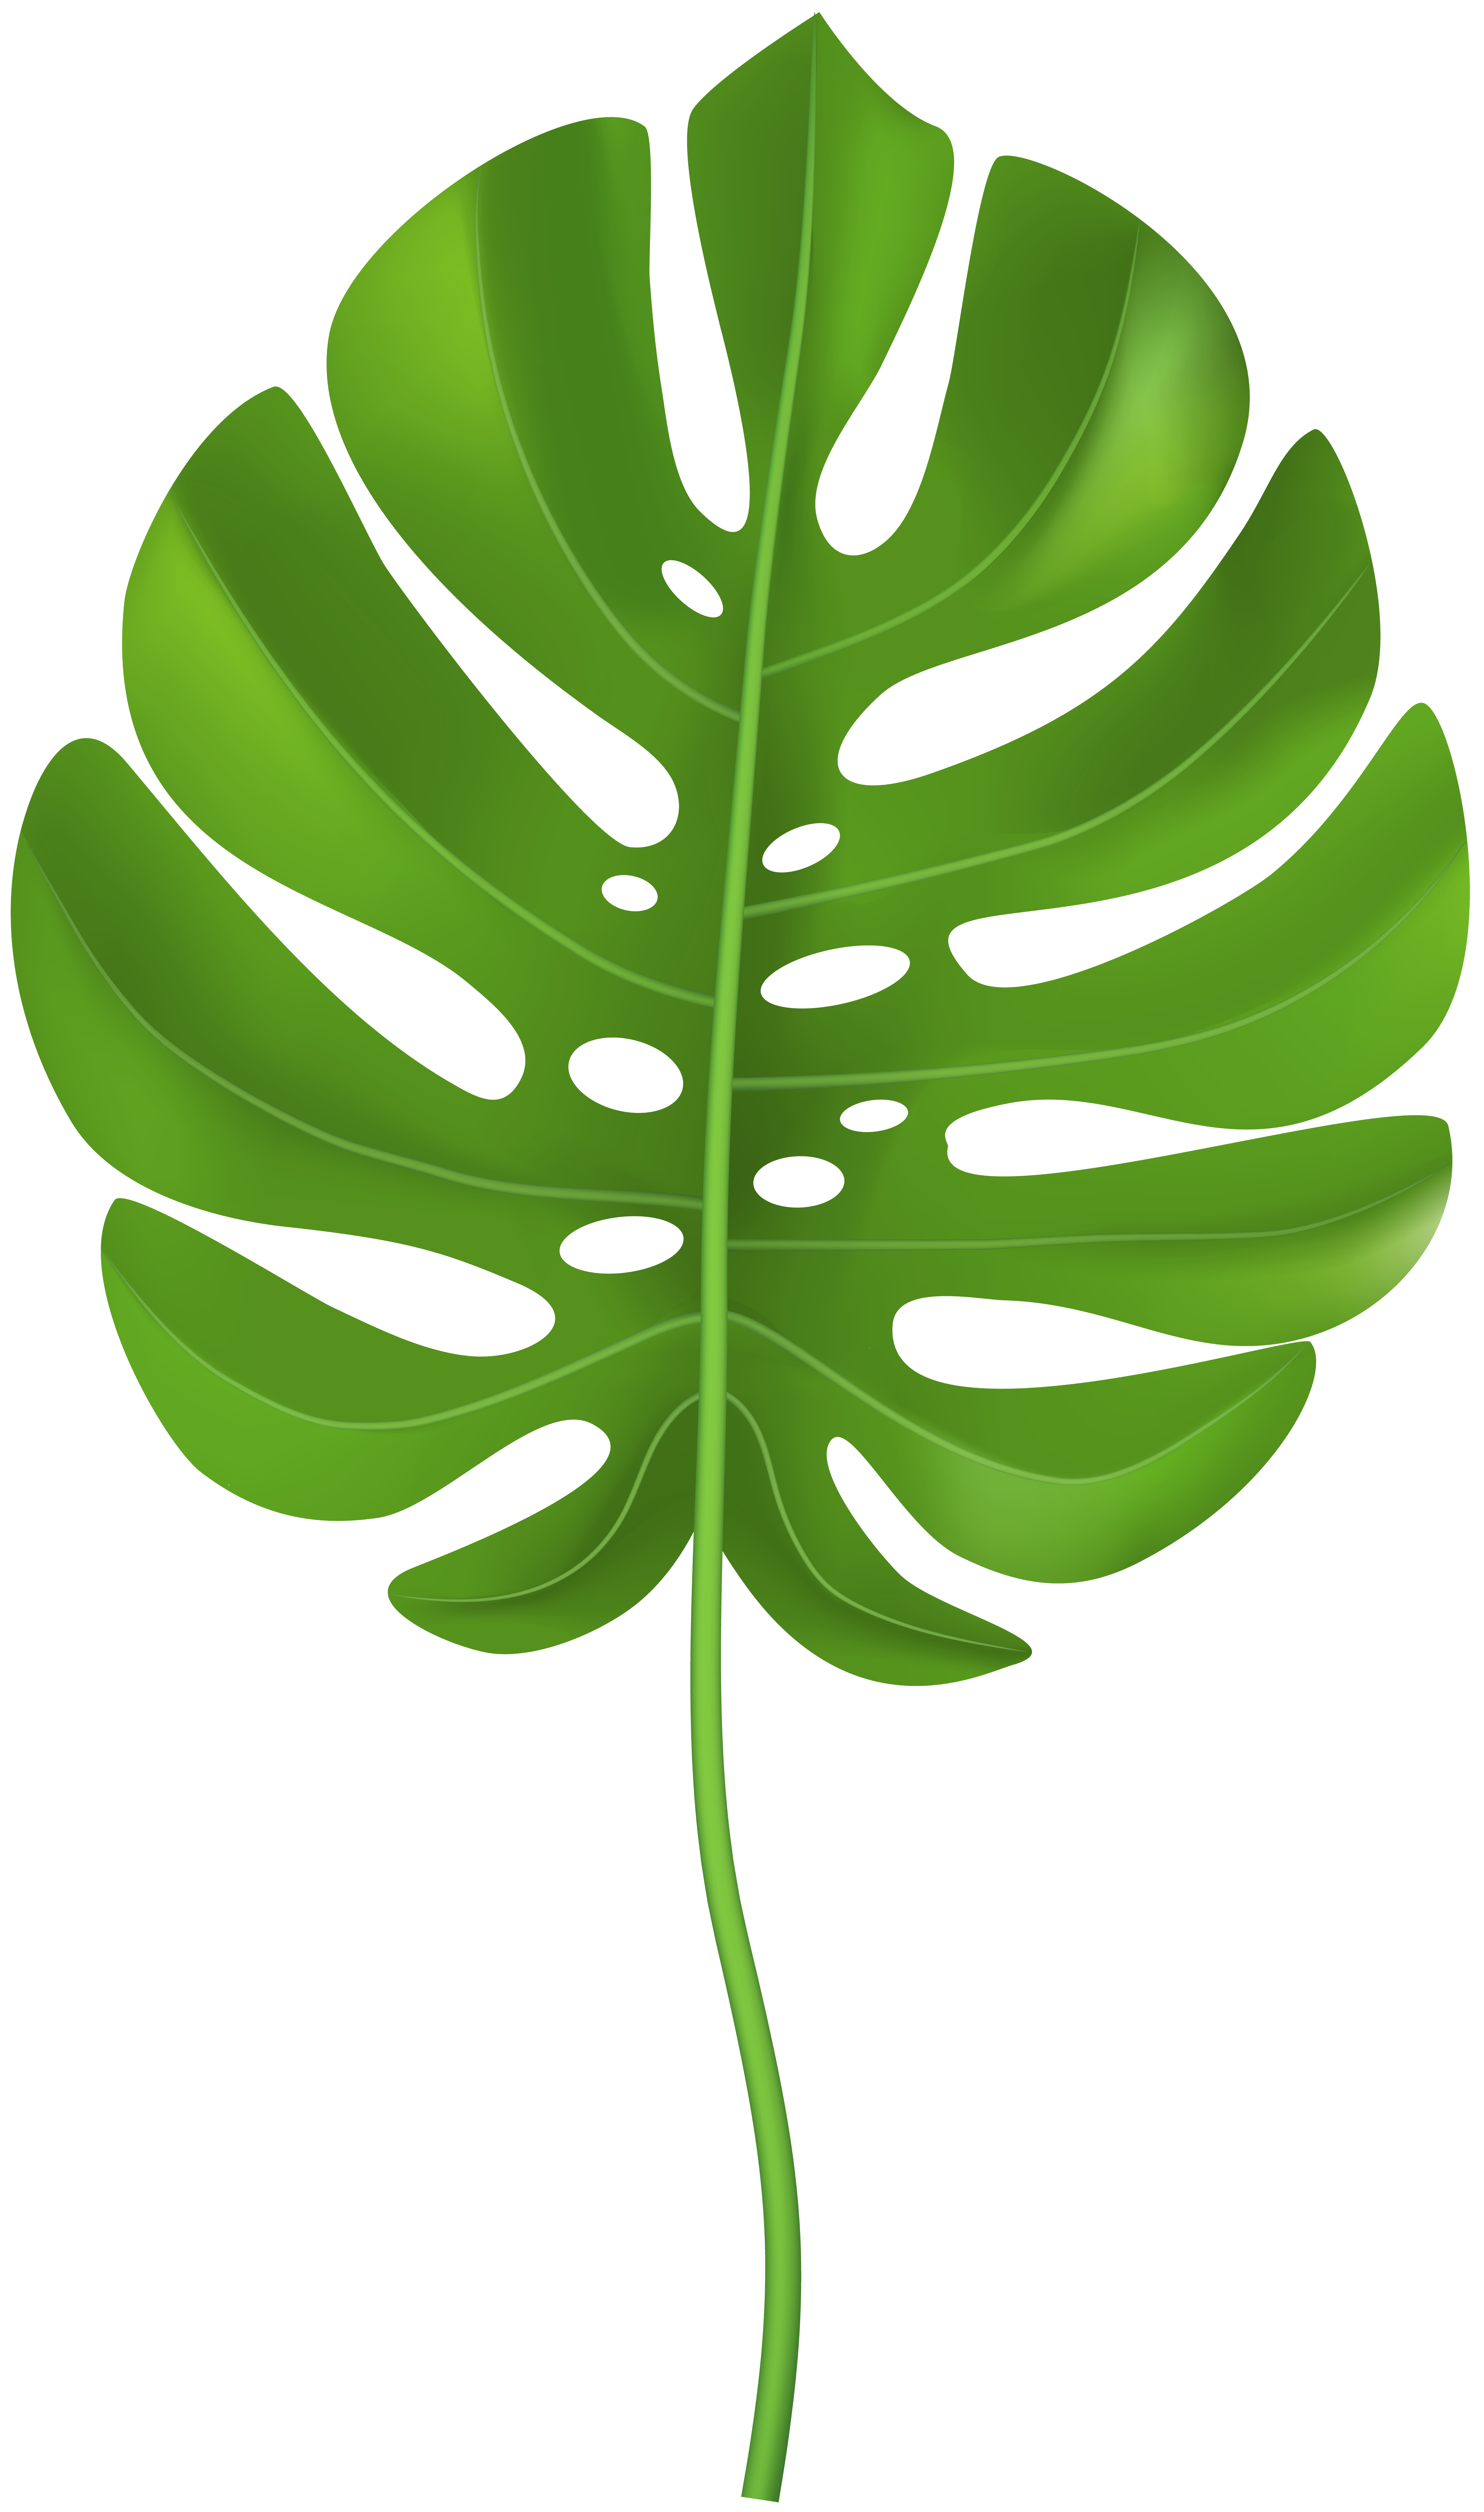 Tropical Leaves Clipart 212 Leaf Stencil Leaf Drawing Tropical Leaves